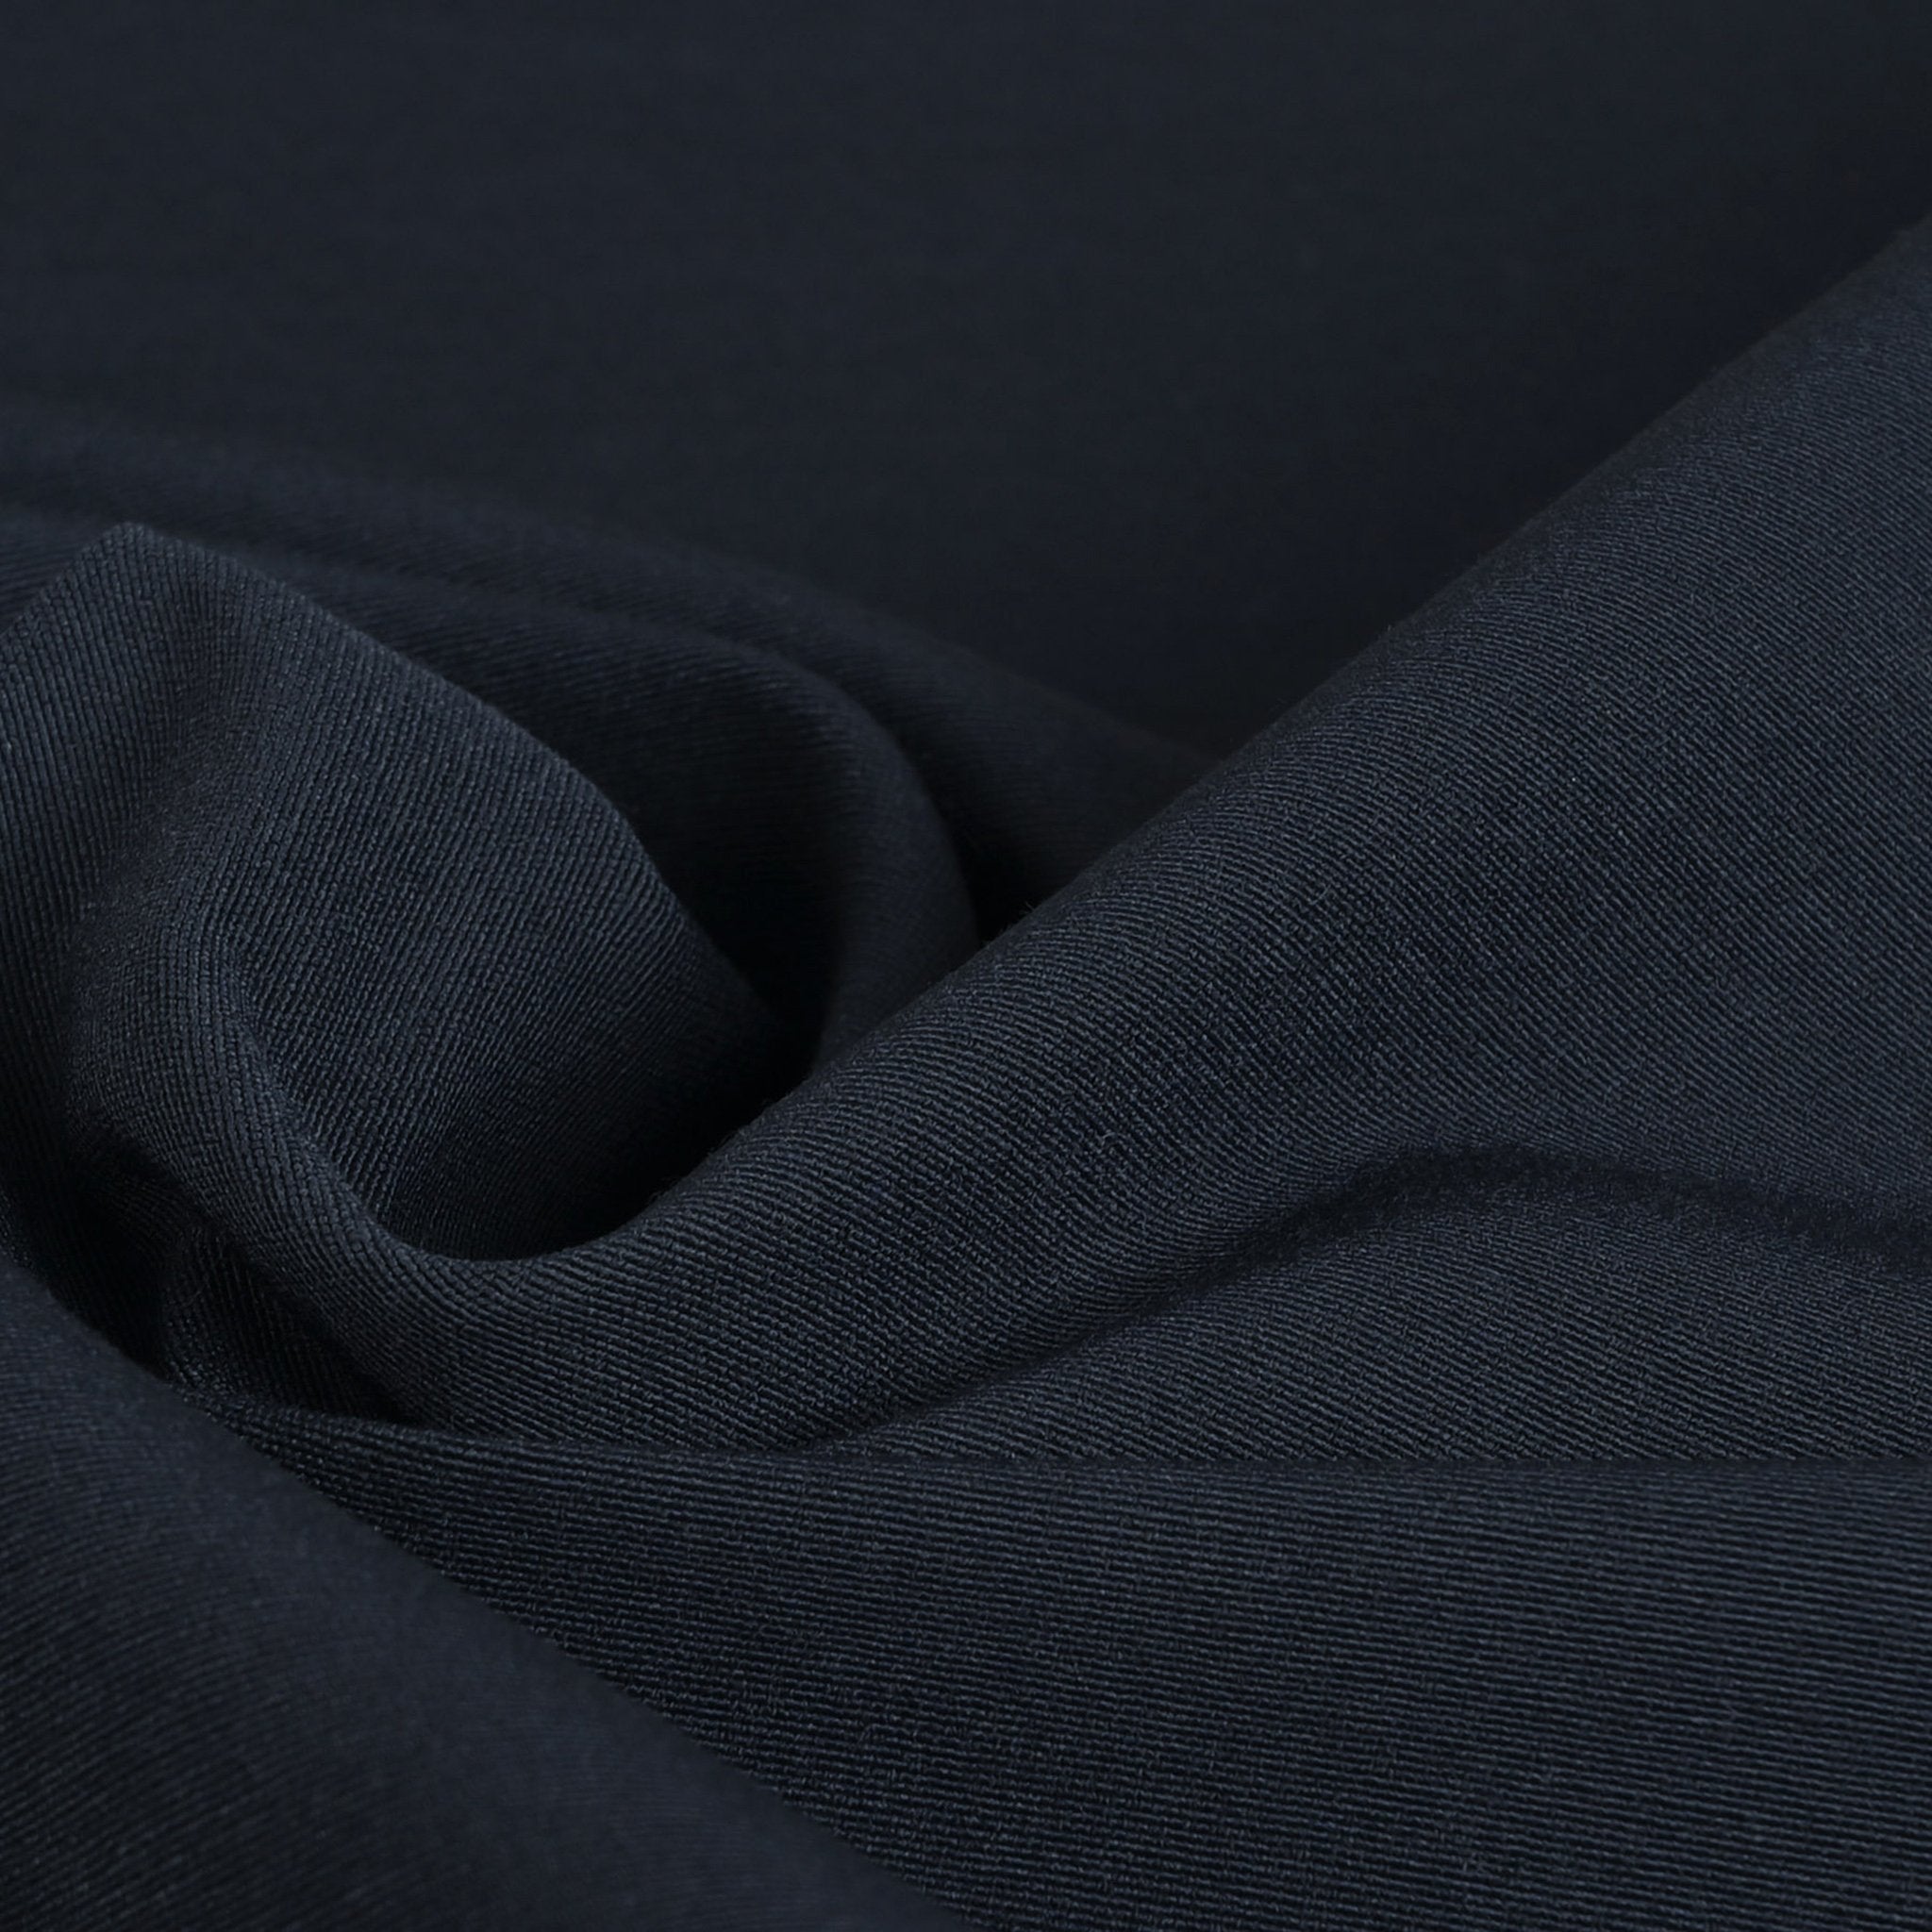 Navy Suiting Fabric 99830